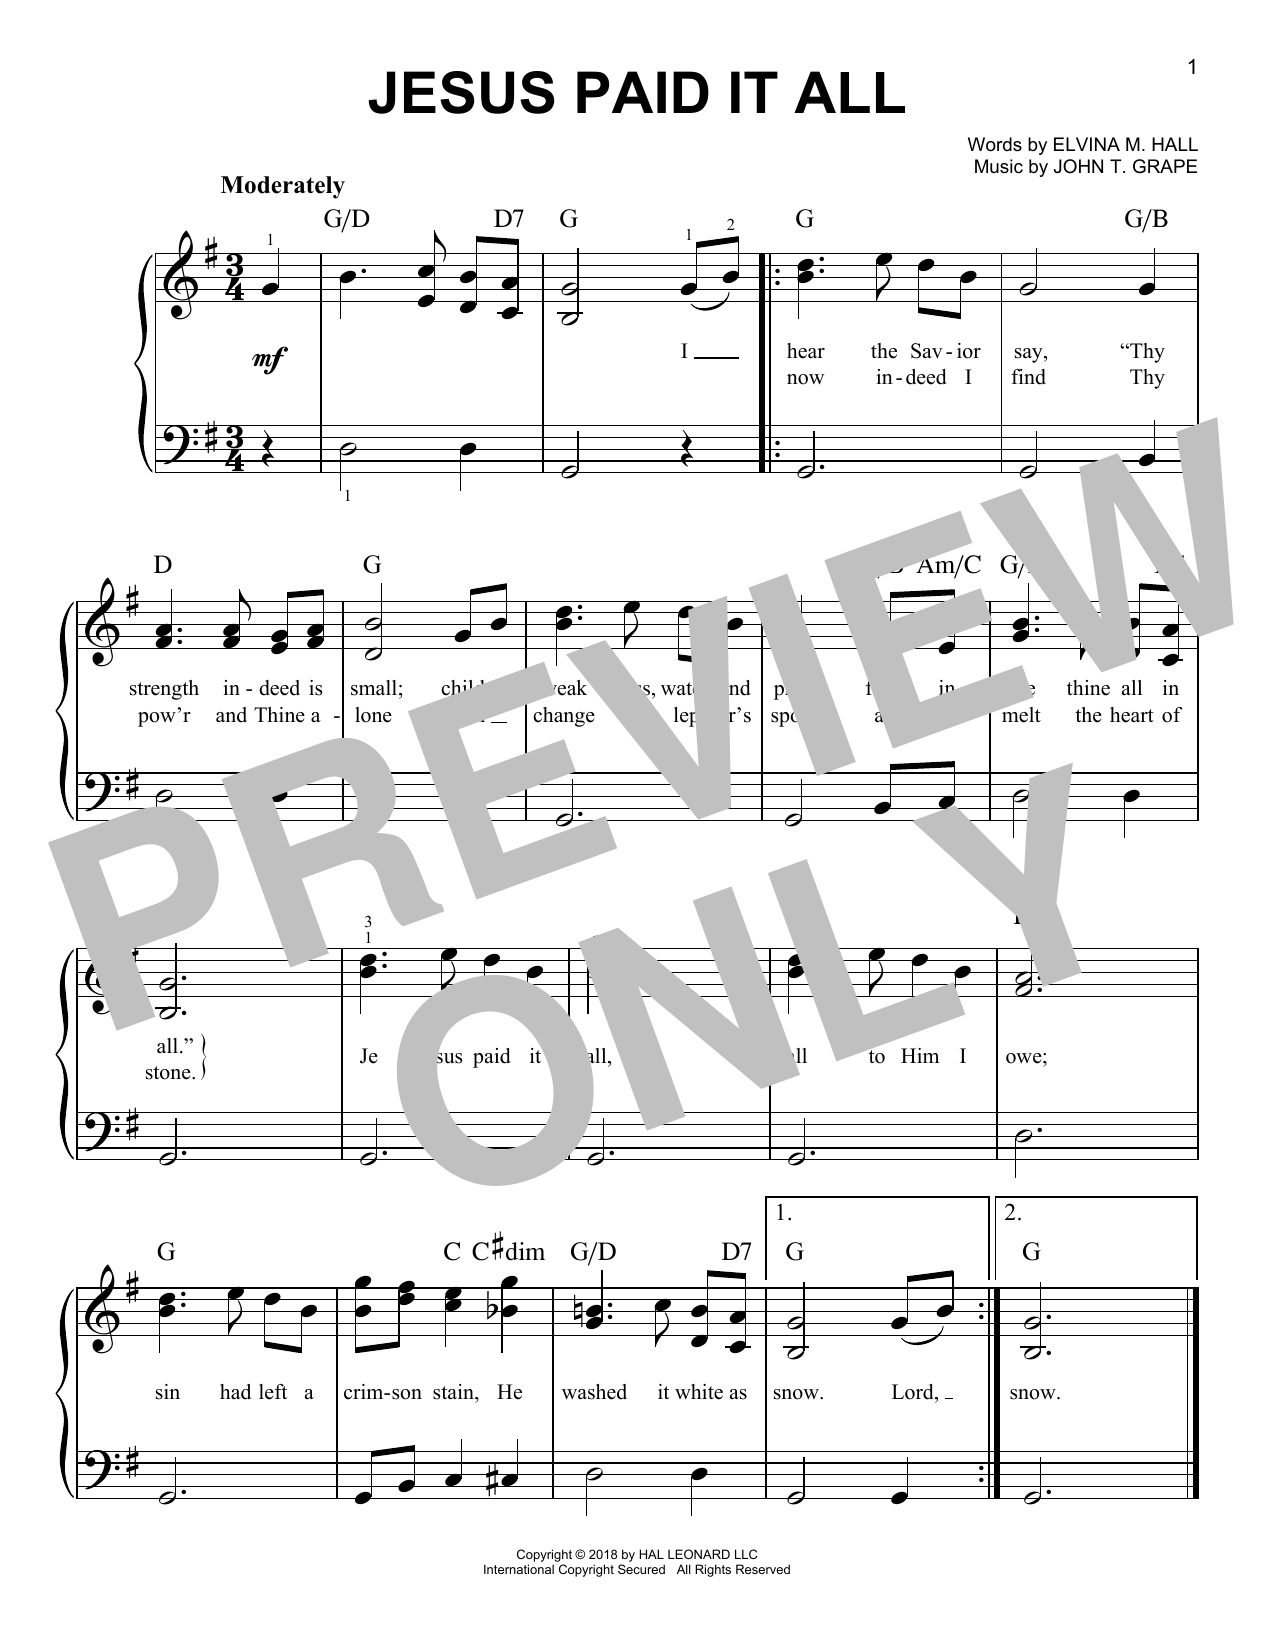 Jesus Paid It All Chords John T Grape Jesus Paid It All Sheet Music Notes Chords Download Printable Easy Piano Sku 254423